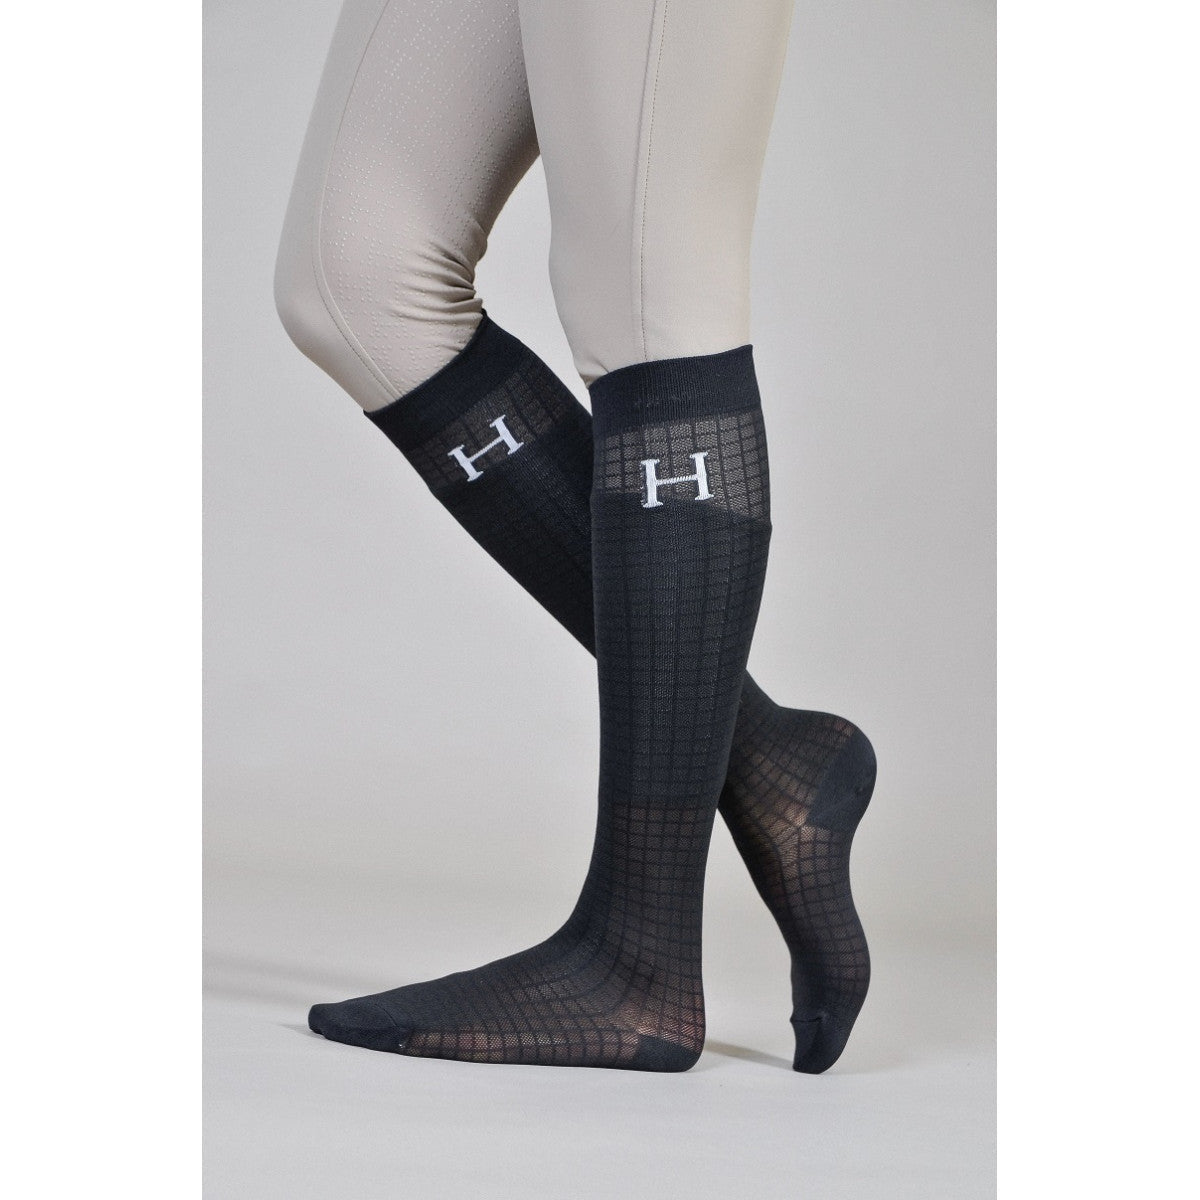 HARCOUR ACCESSORIES 35-39 / BLACK Harcour Sopra Riding Socks - Twin Pack